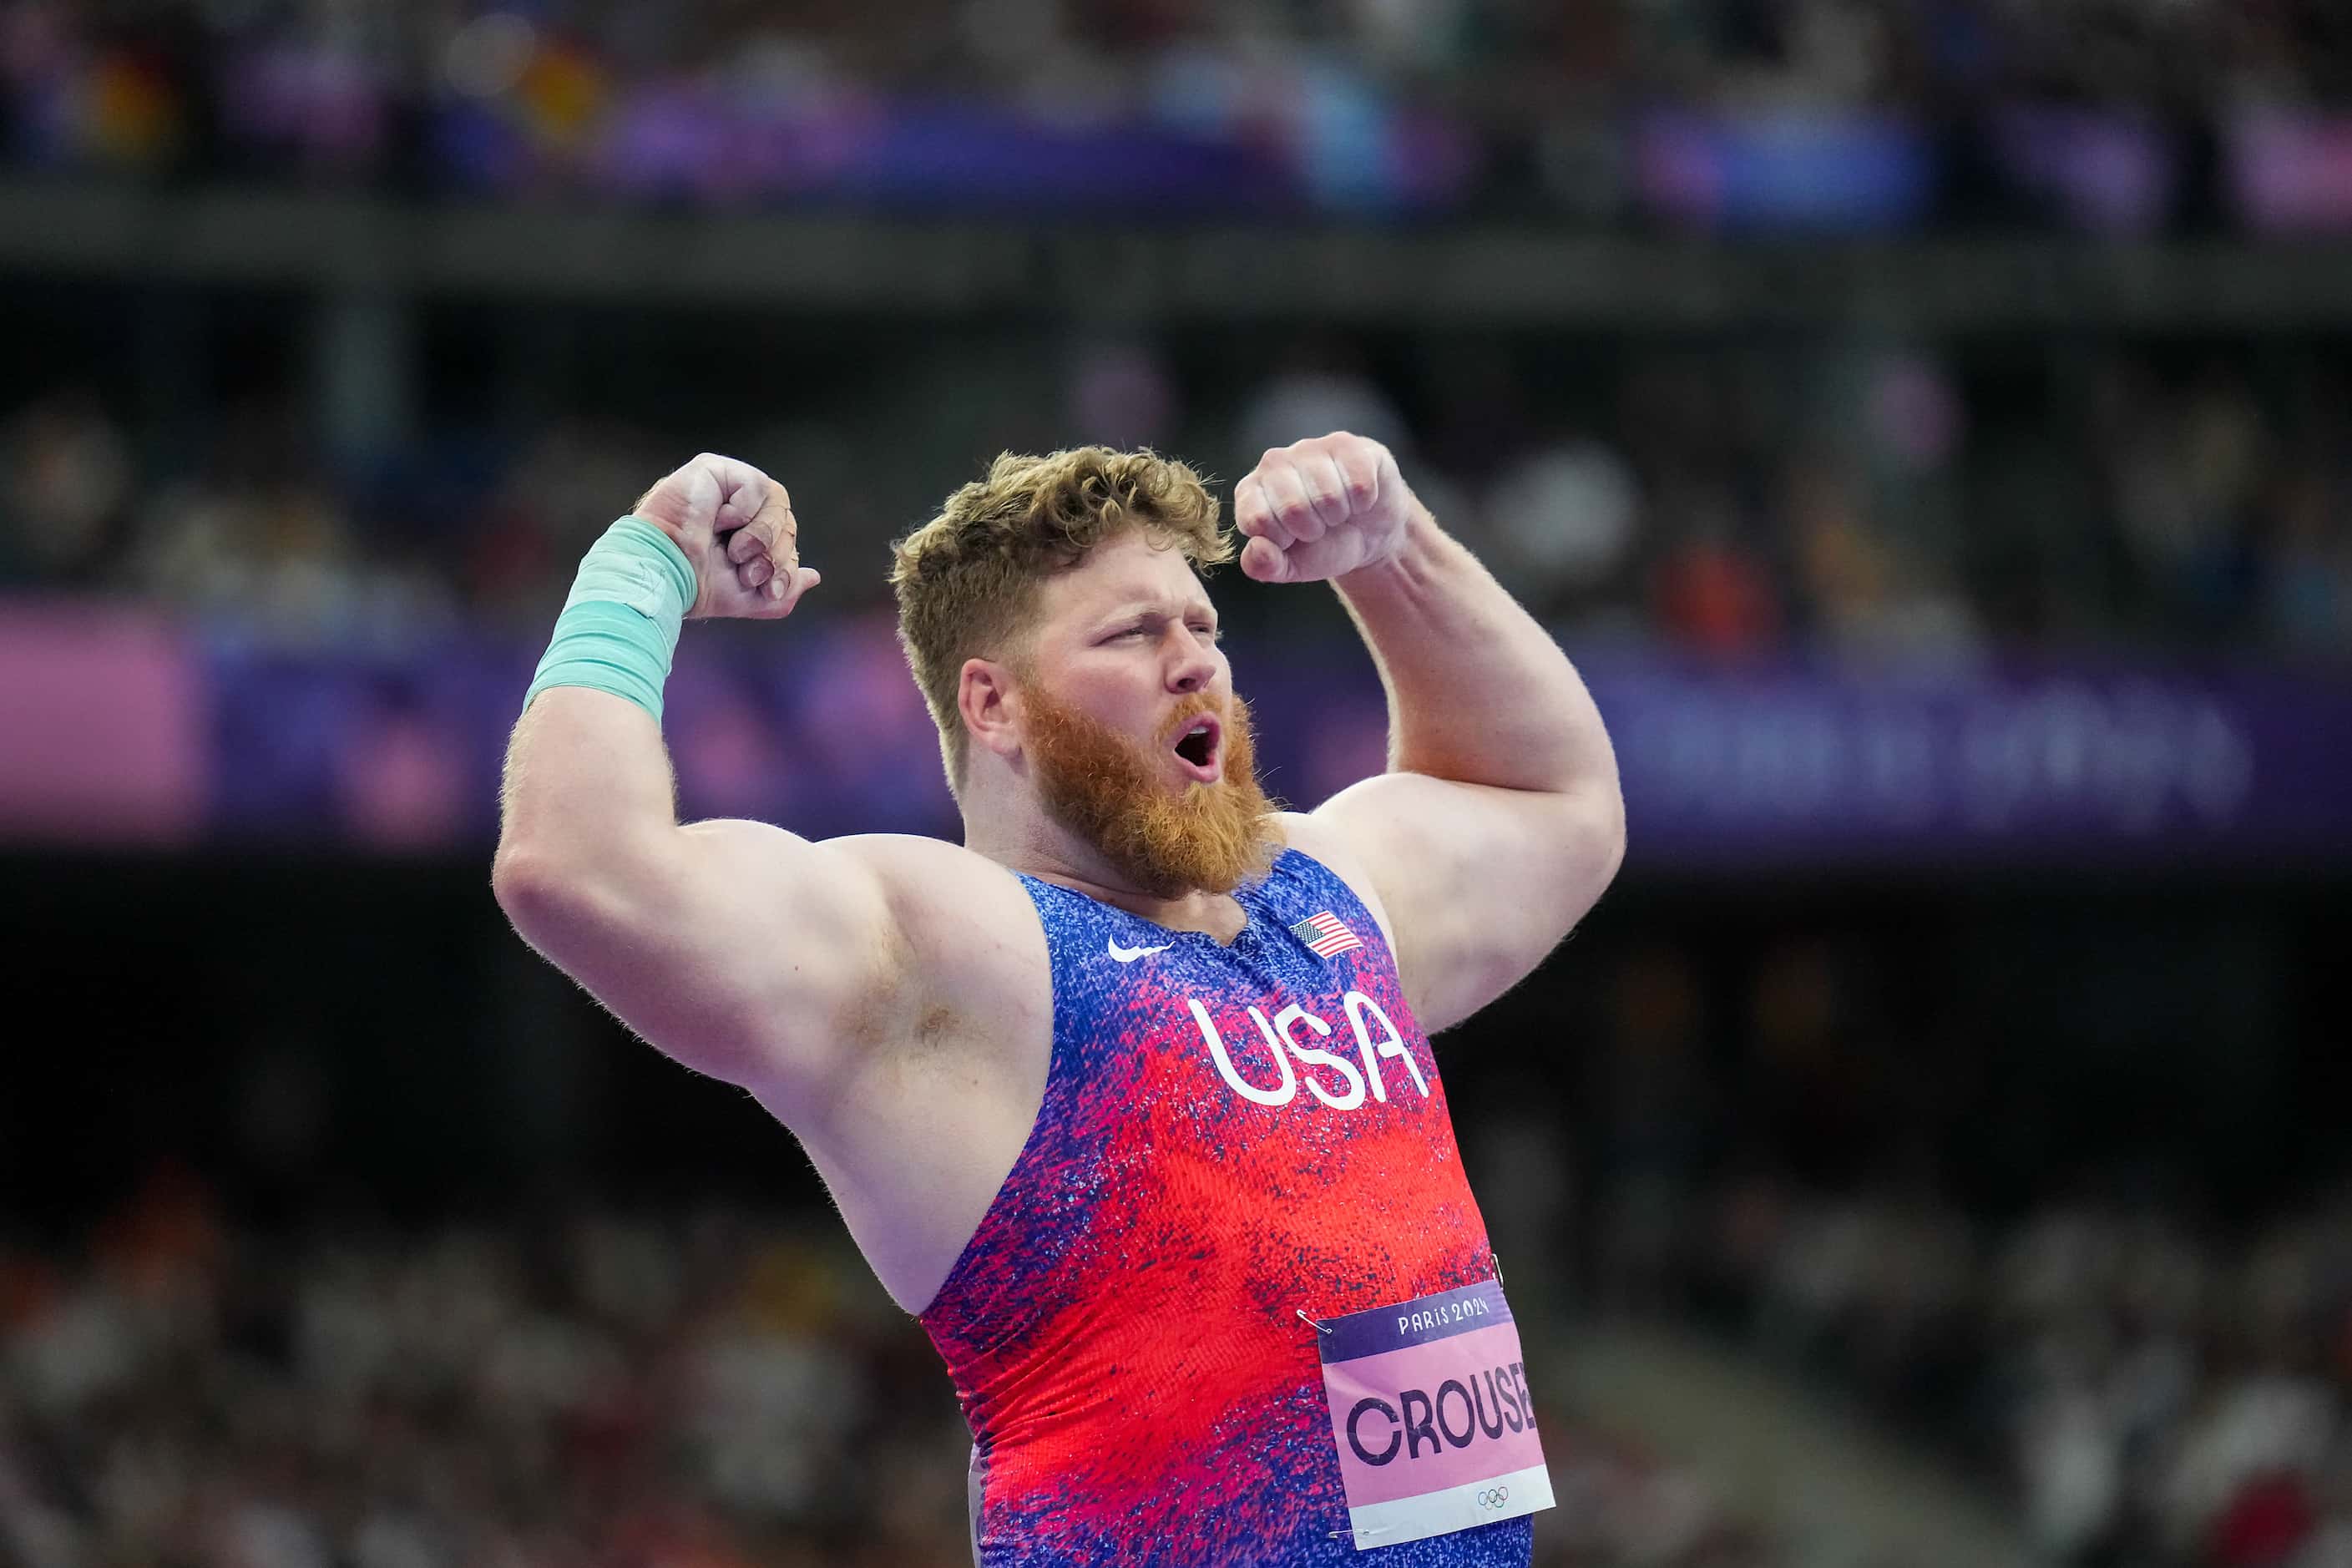 Ryan Crouser of the United States reacts while competing in the men’s shot put final at the...